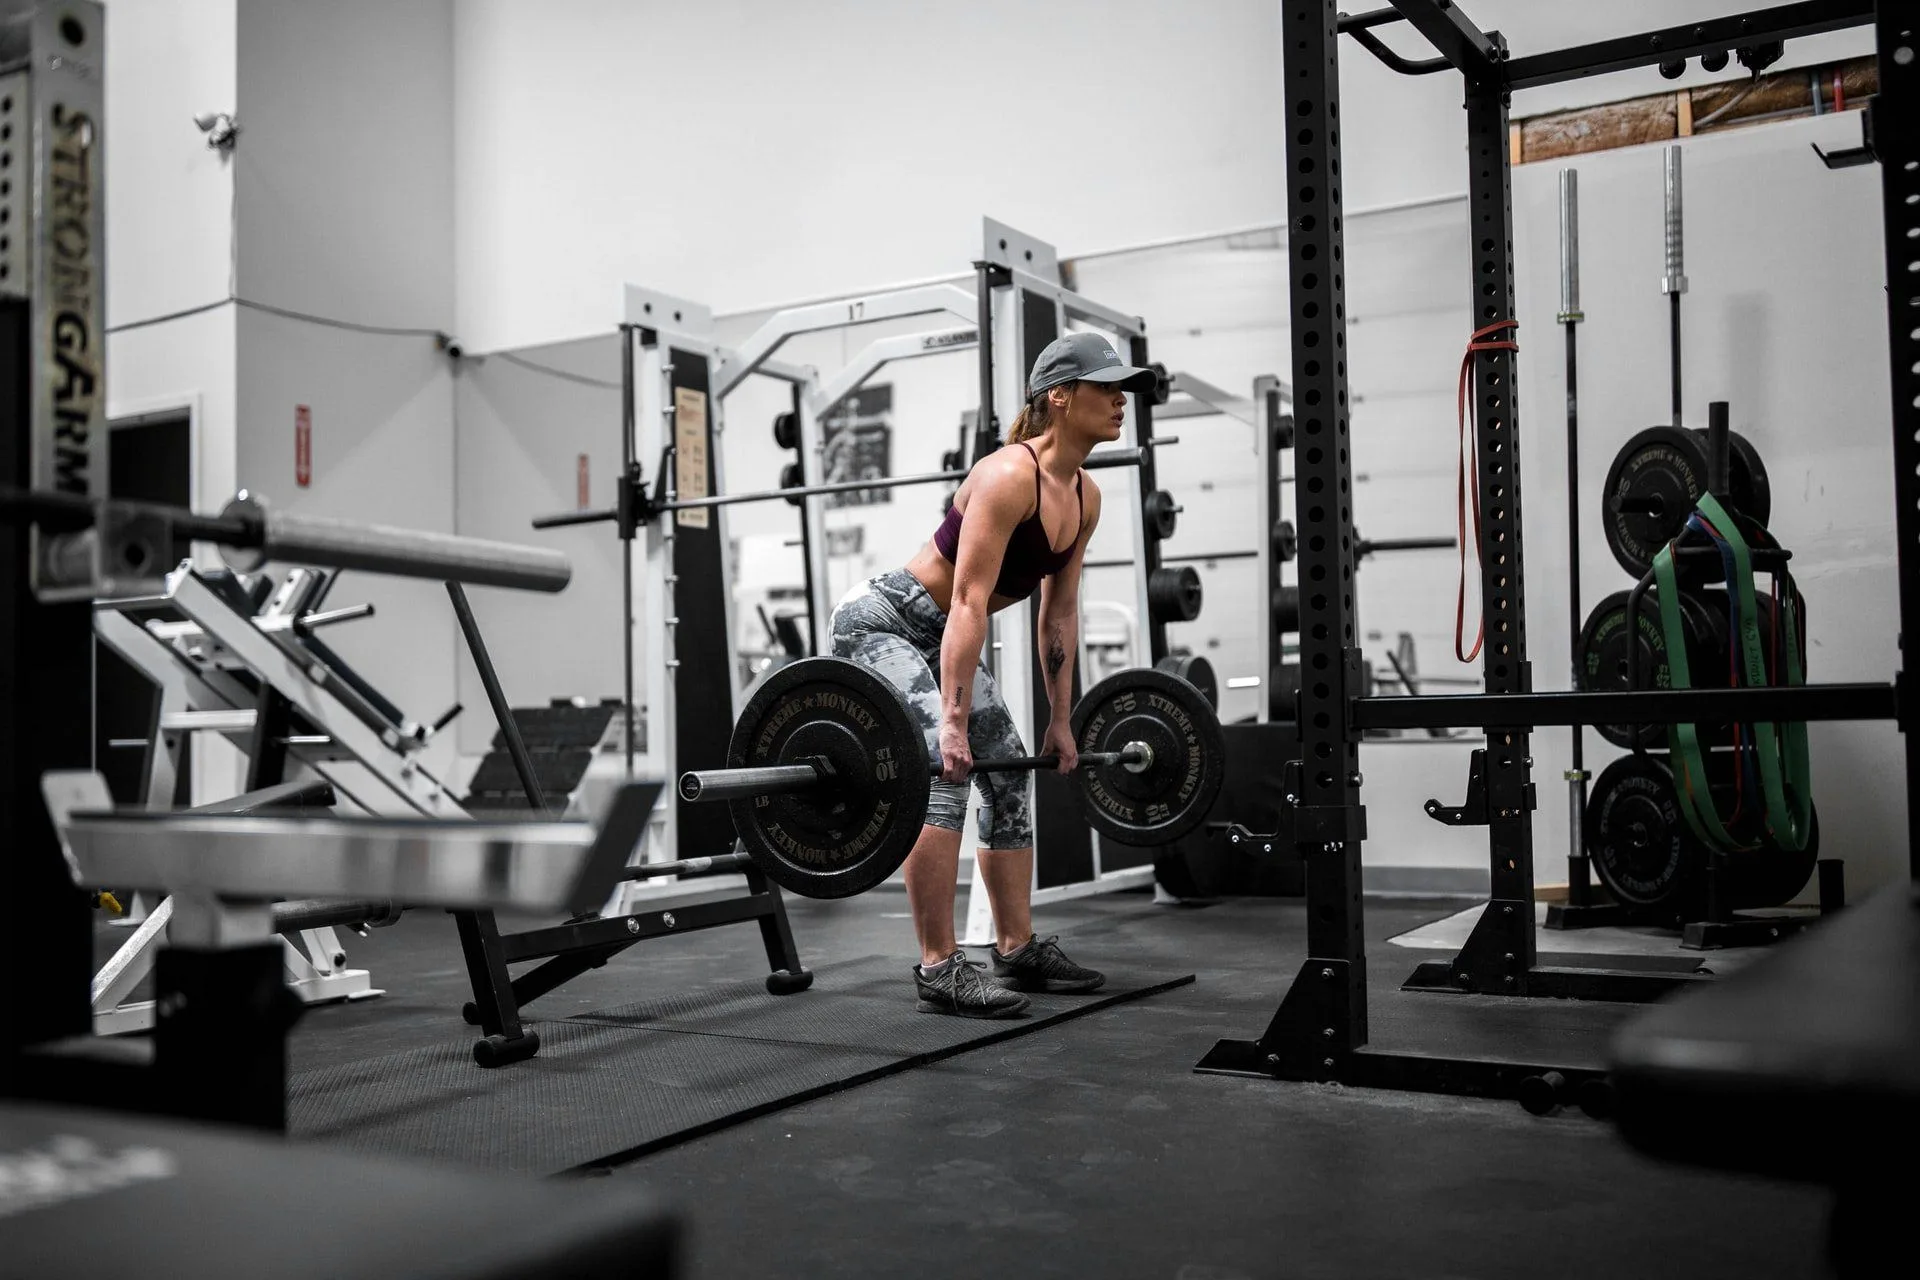 9 Reasons You Get Knee Pain Deadlifting (& How To Fix It)